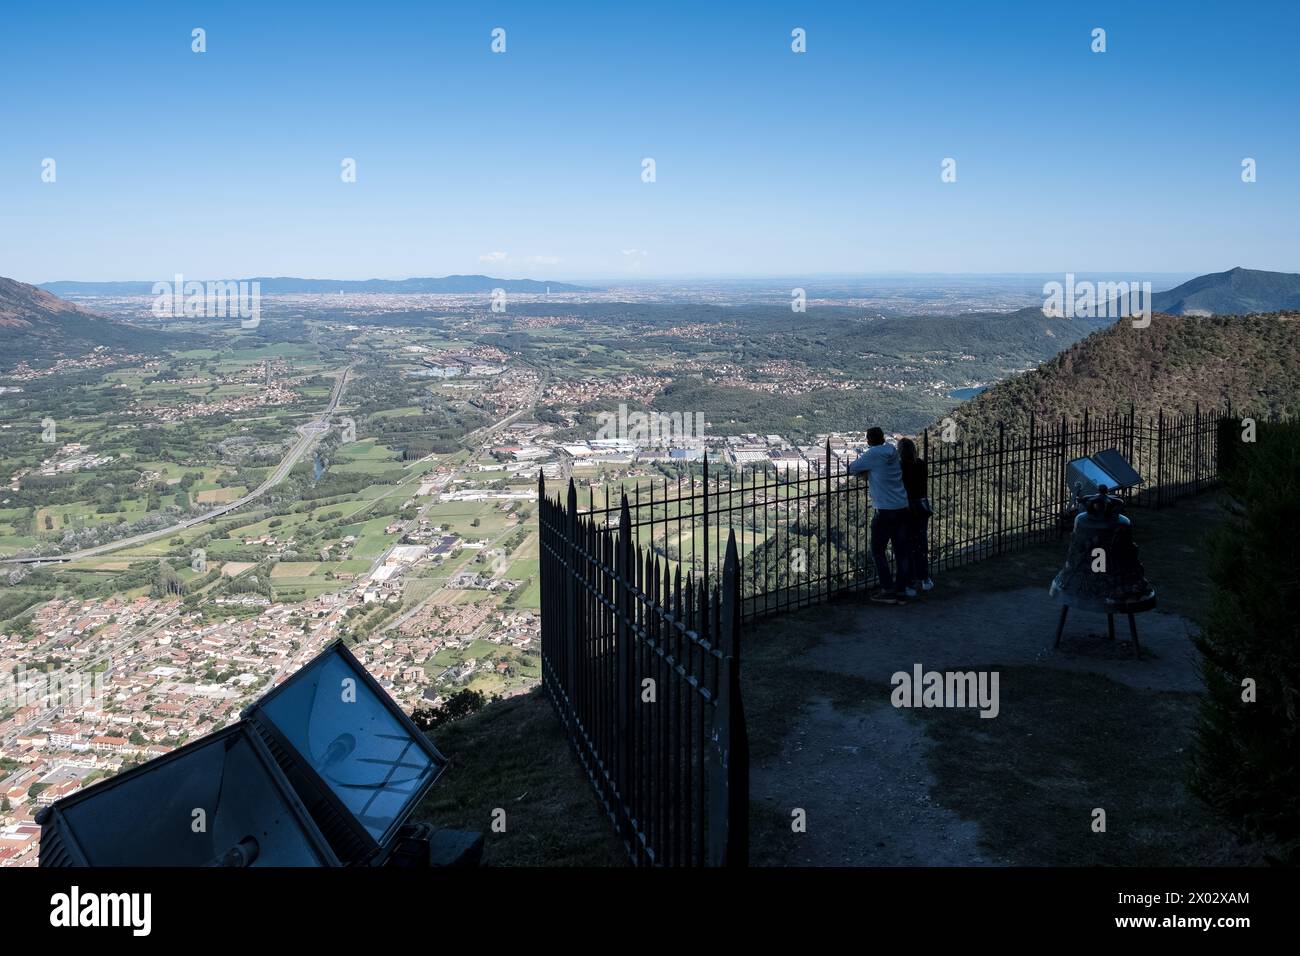 View of the City of Turin from the Sacra di San Michele (Saint Michael's Abbey), a religious complex on Mount Pirchiriano Stock Photo